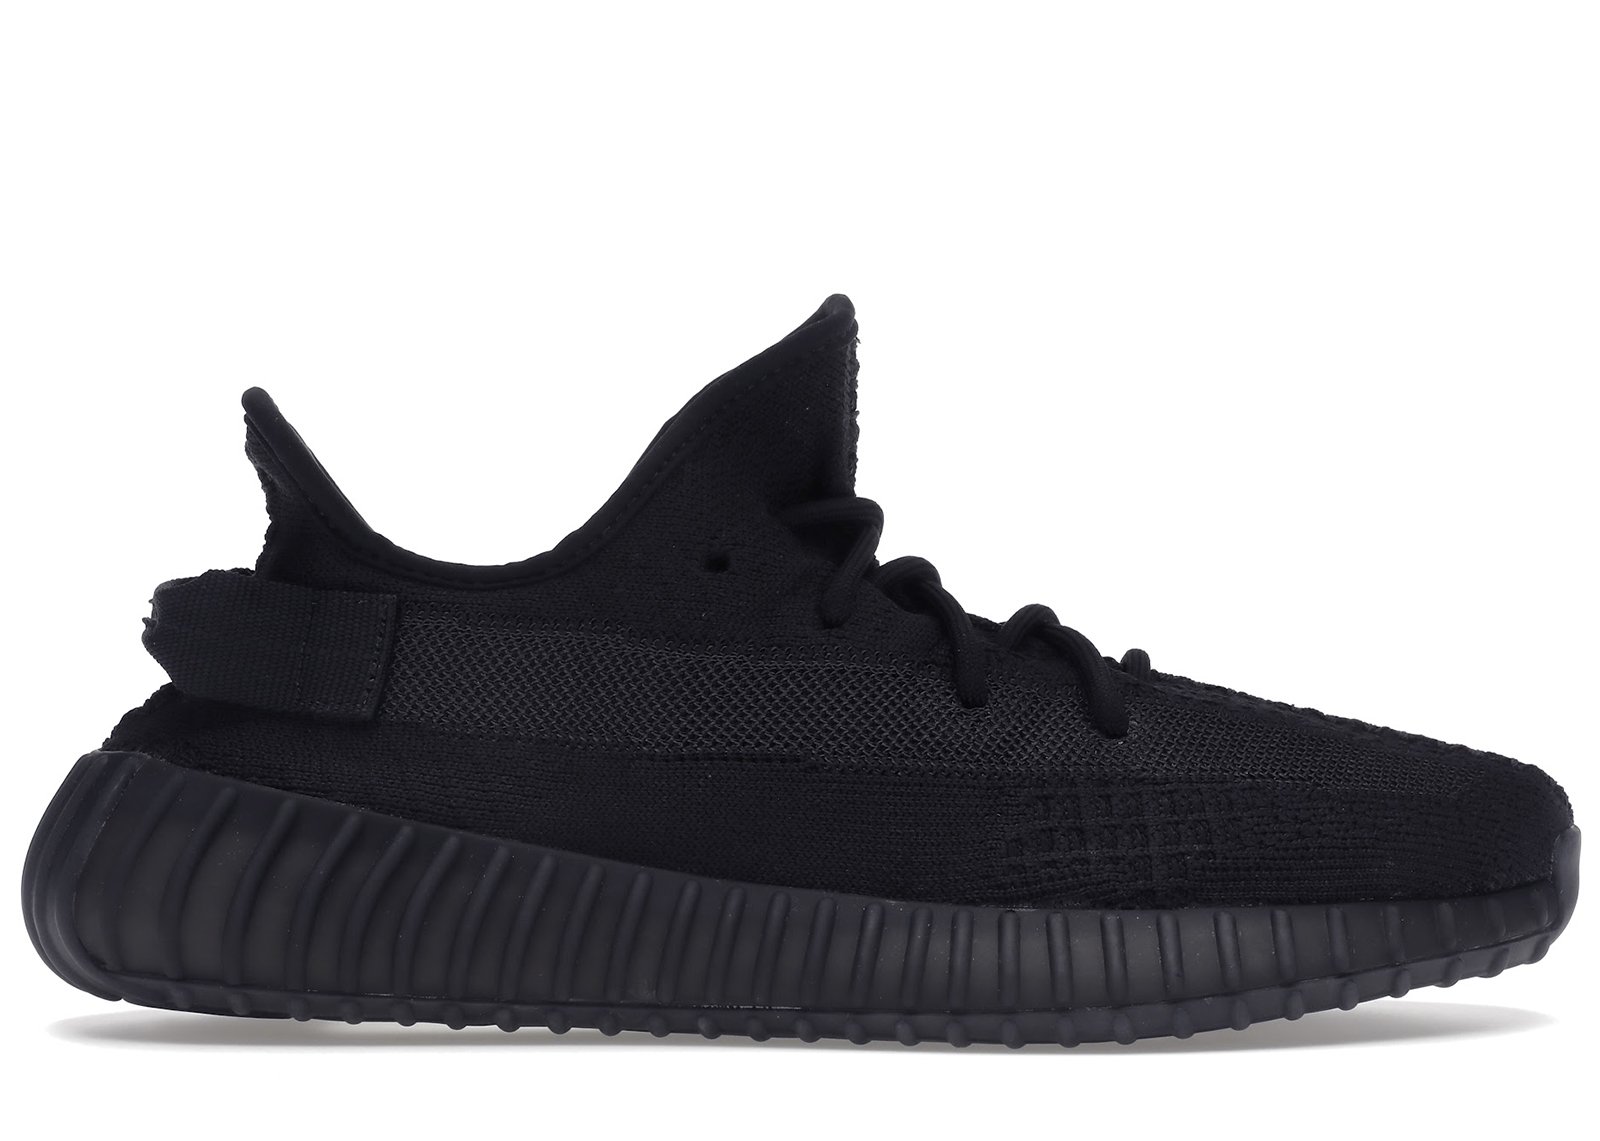 adidas Yeezy Boost 350 V2 Onyx (2022/2023) sneakers